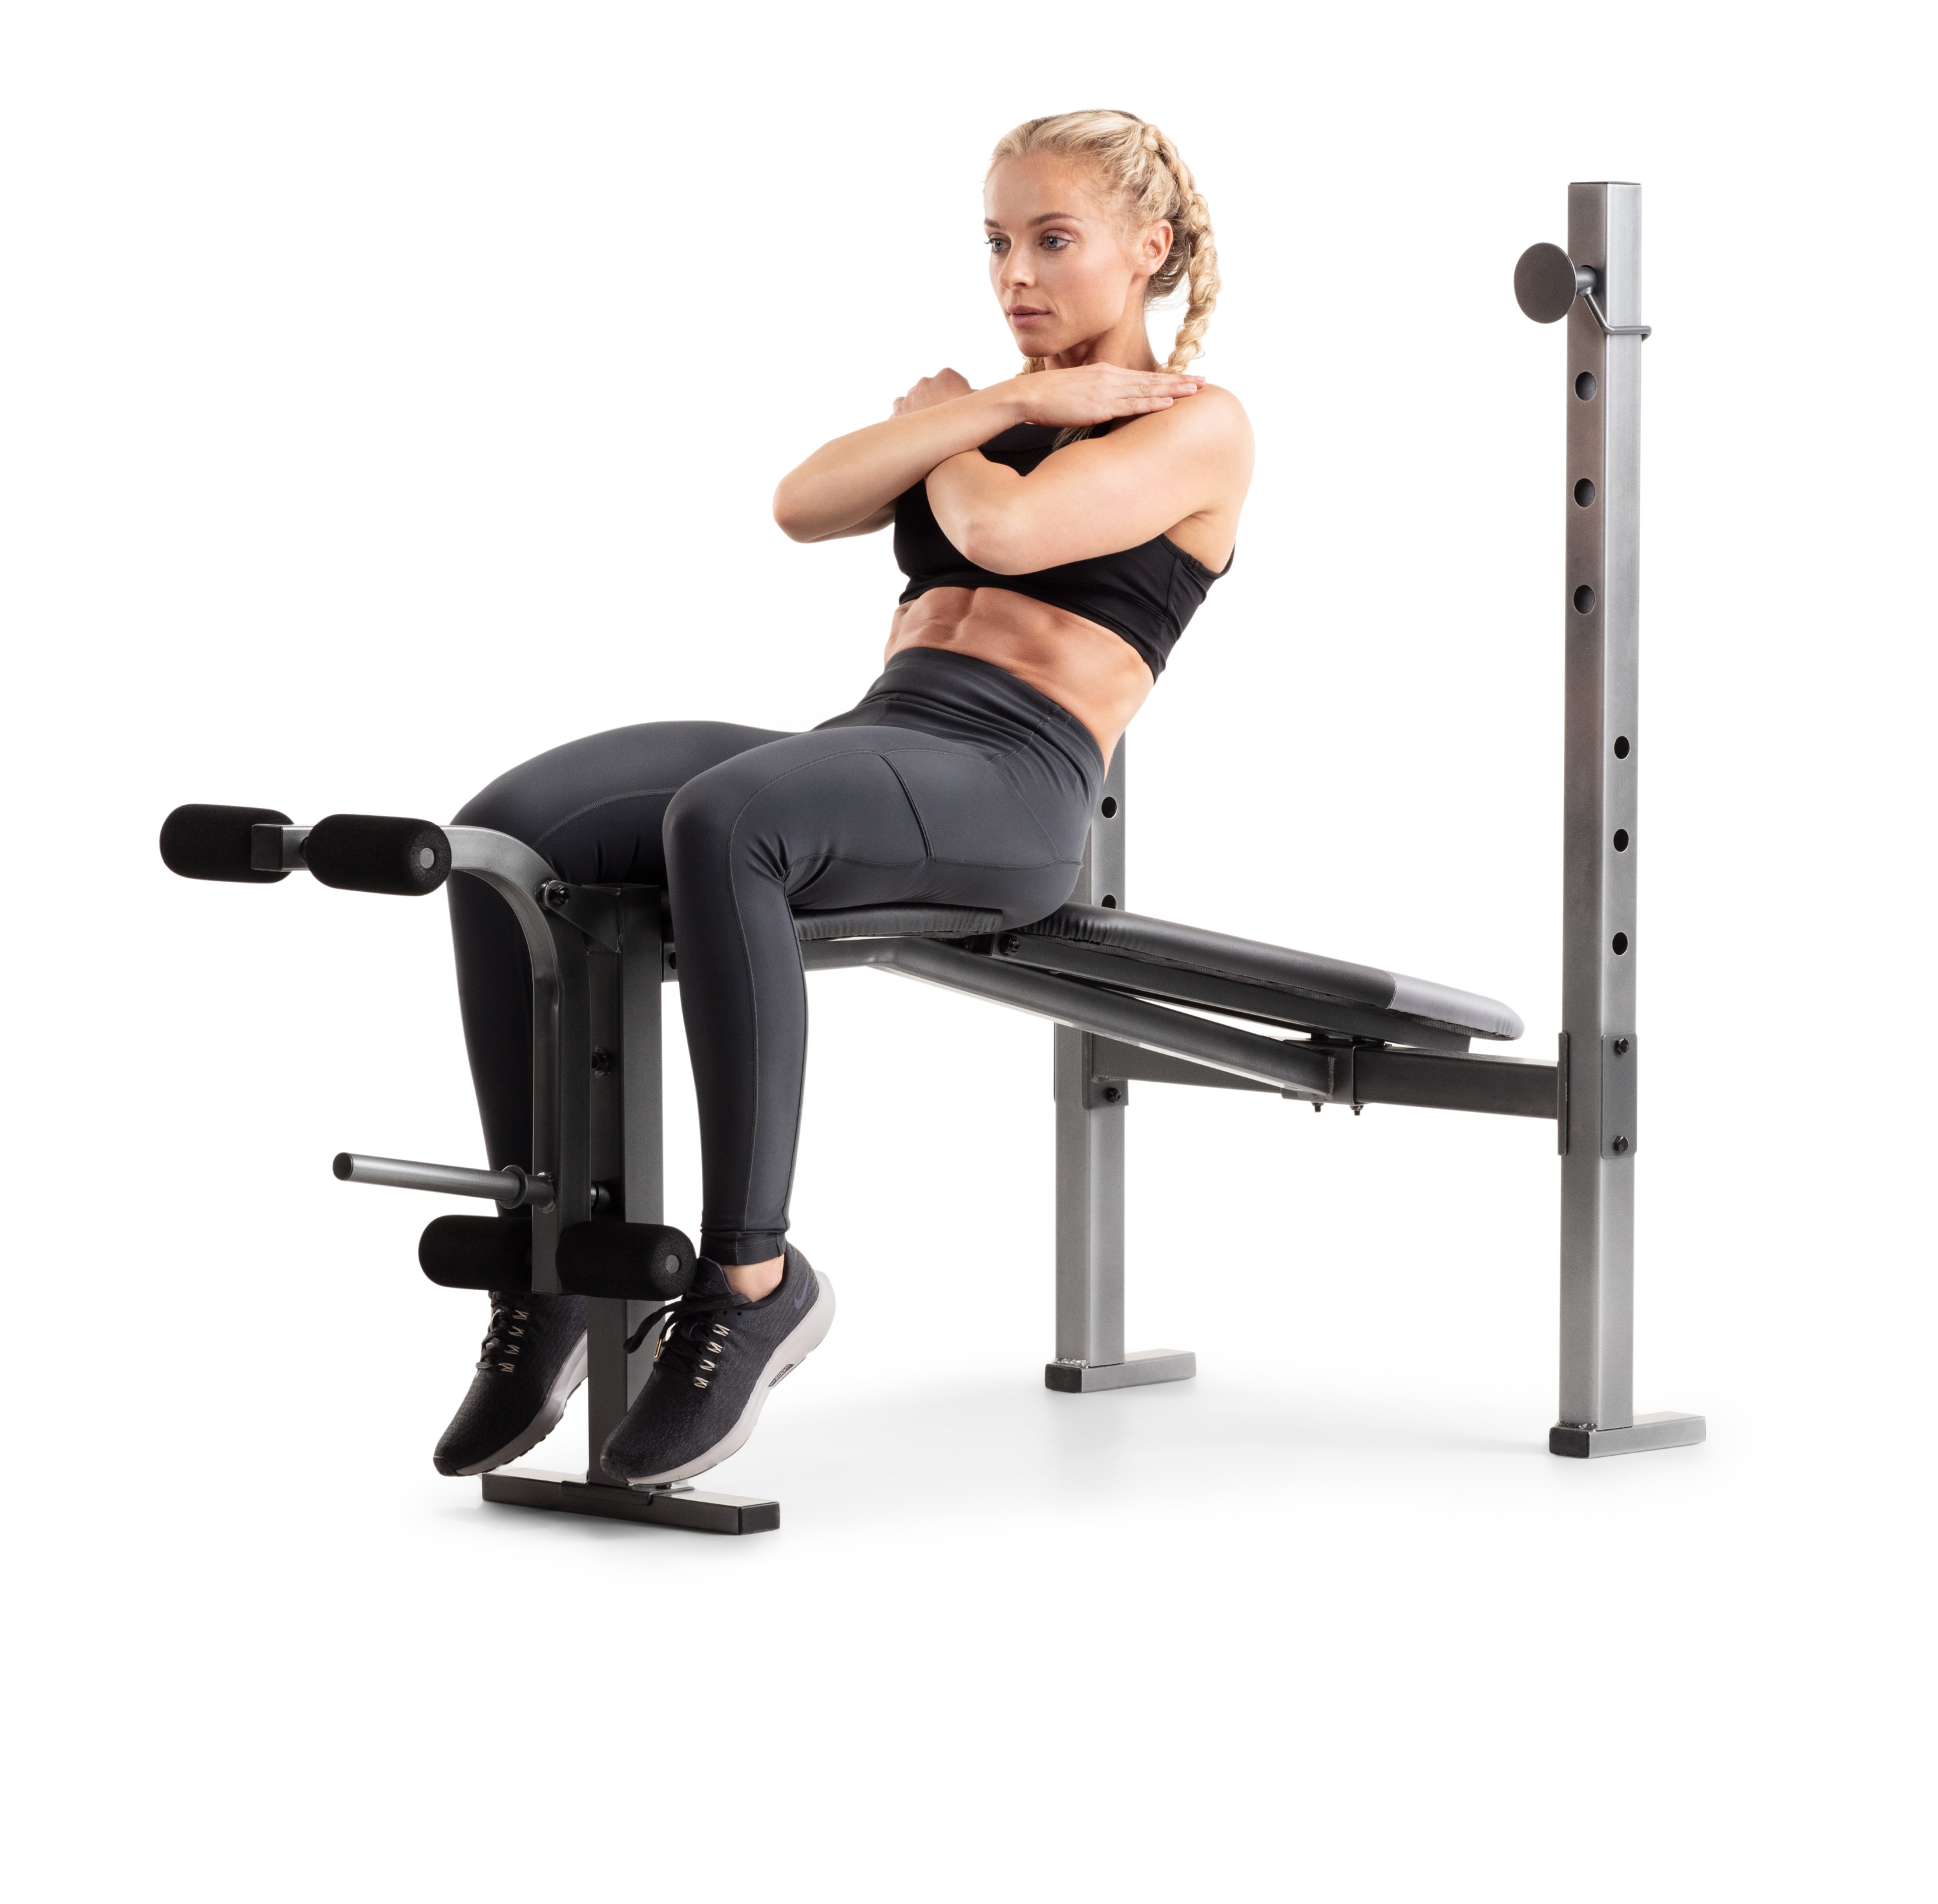 Weider XR 6.1 Adjustable Weight Bench with Leg Developer, 410 lb. Weight Limit - image 12 of 12